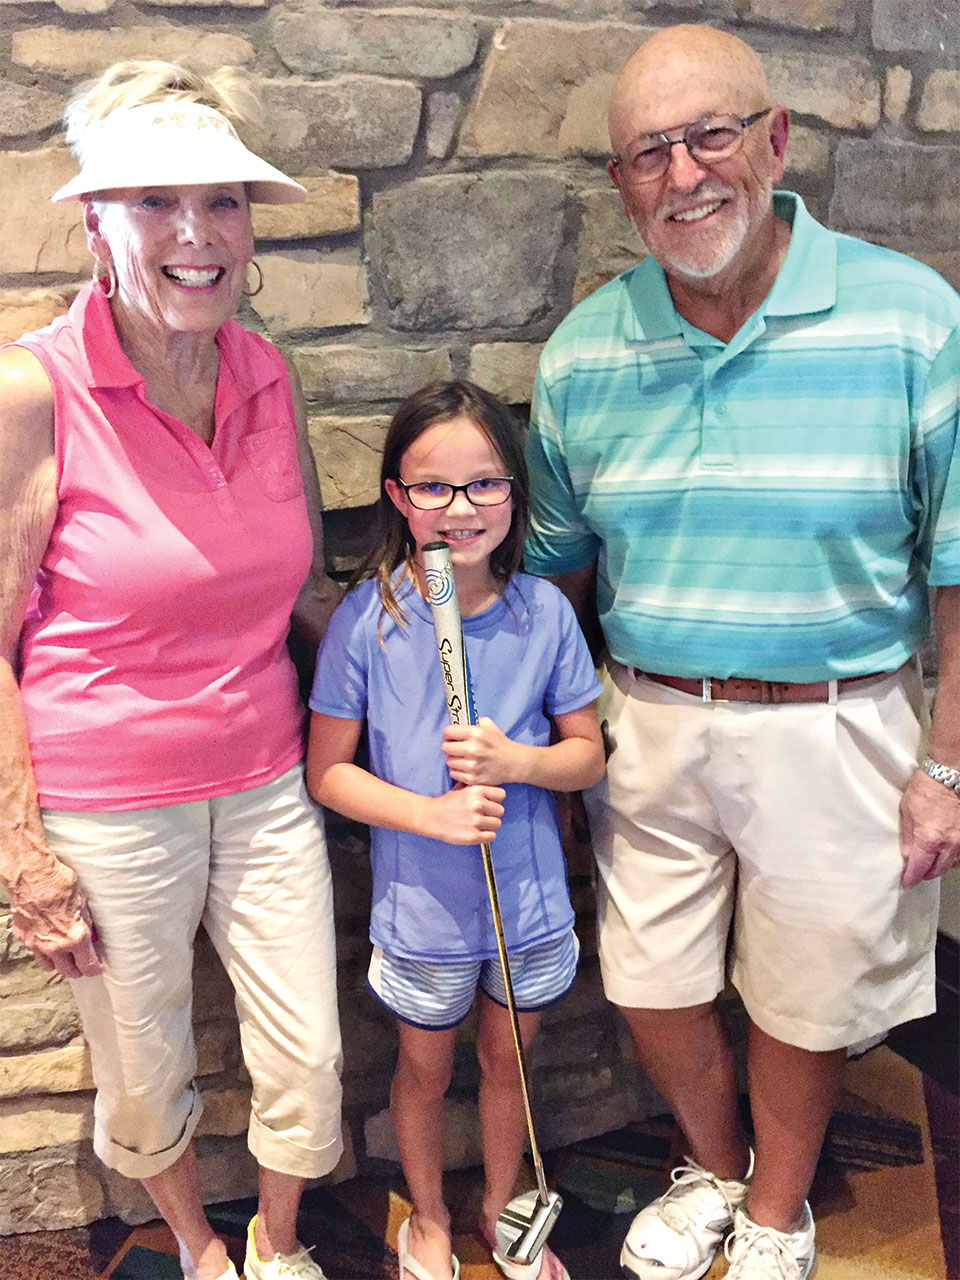 Sandy, granddaughter Chloe, and Dick Christopher participate in the putting league on June 8.